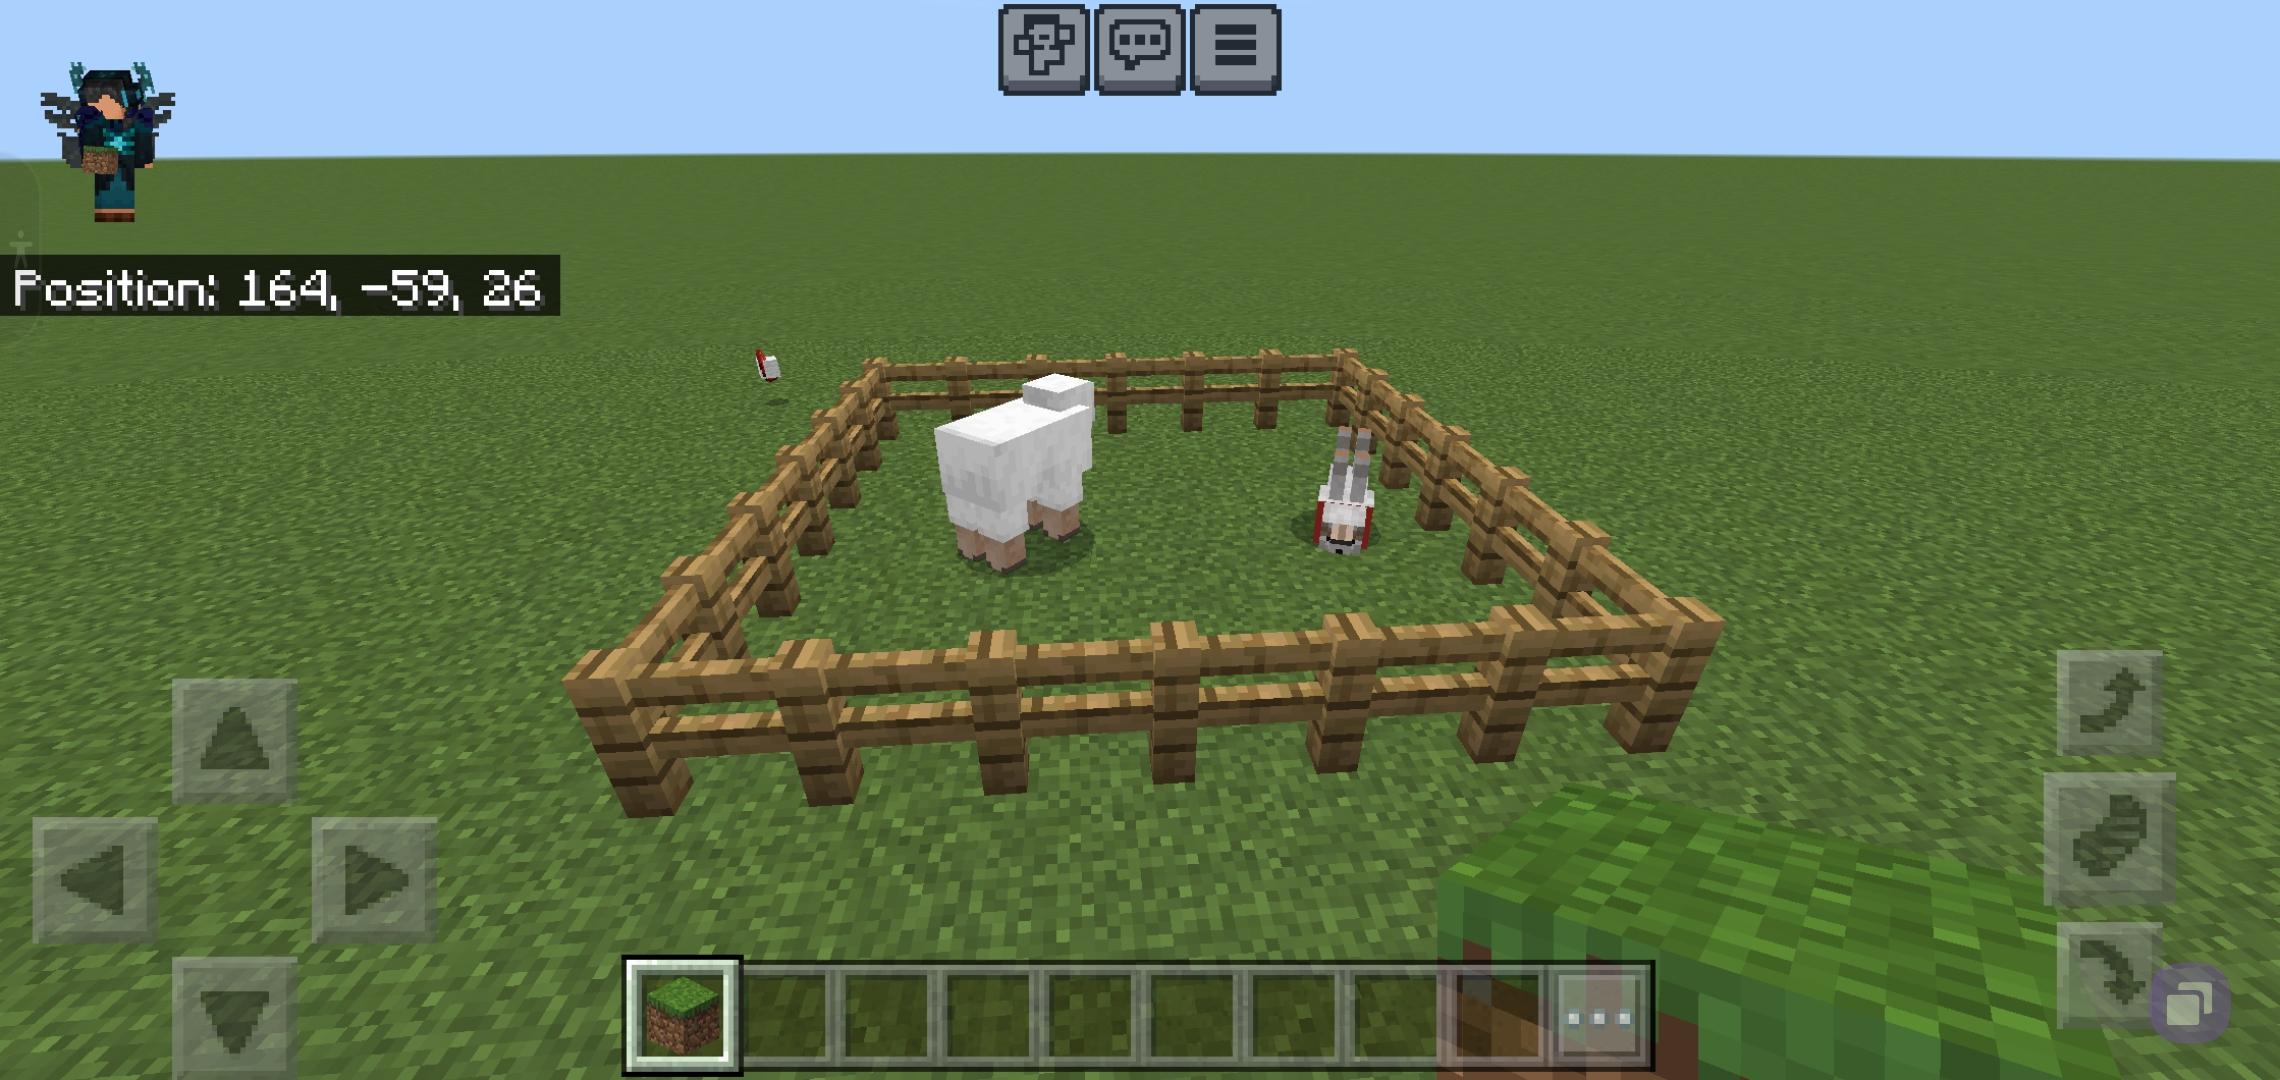 Minecraft Memes - "Can sheep jump fences in Minecraft? 🐑🔥"